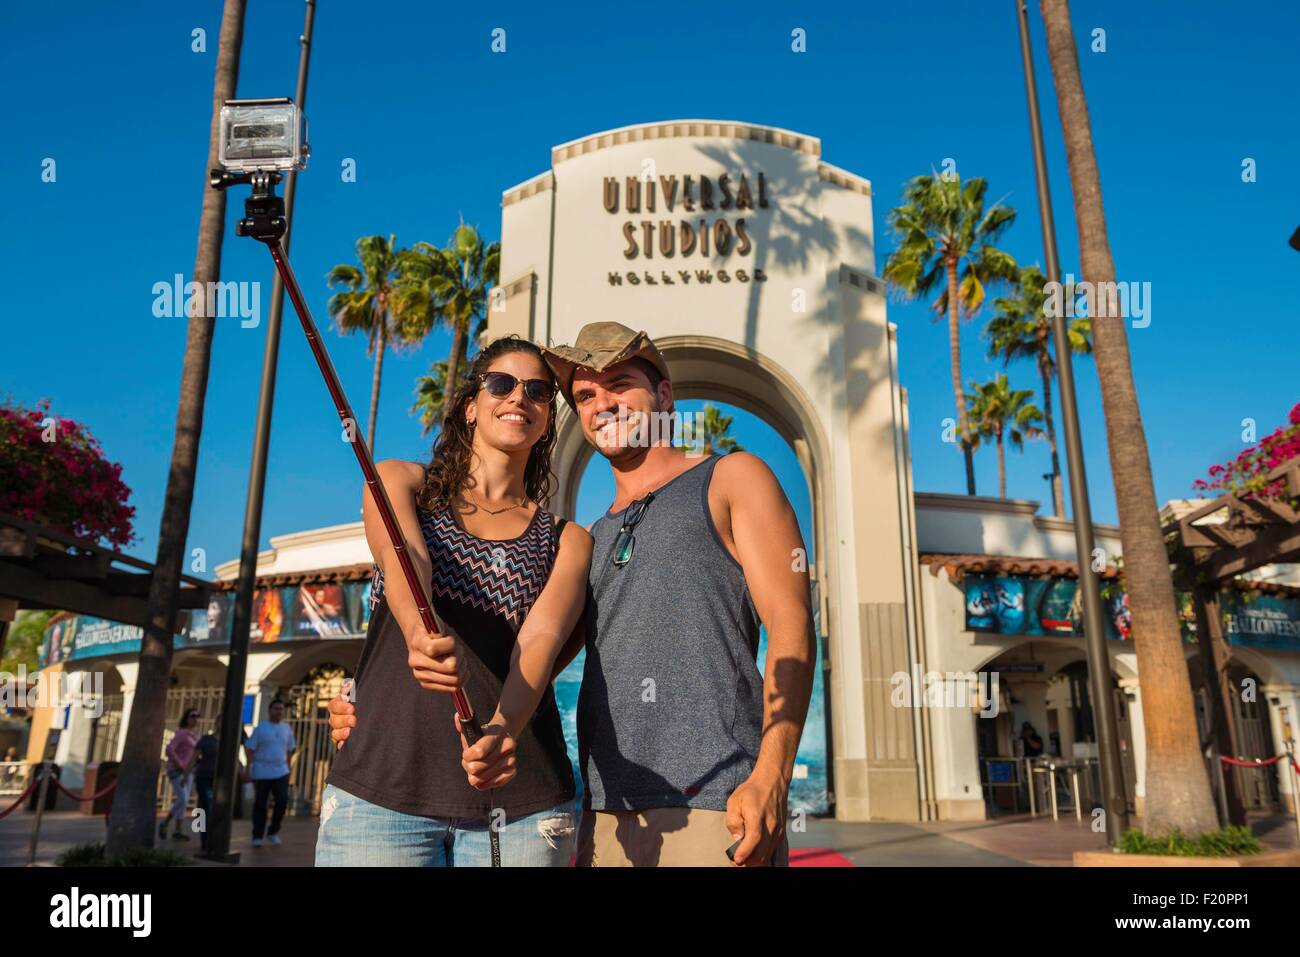 United States, California, Los Angeles, Hollywood, Universal Studios Banque D'Images